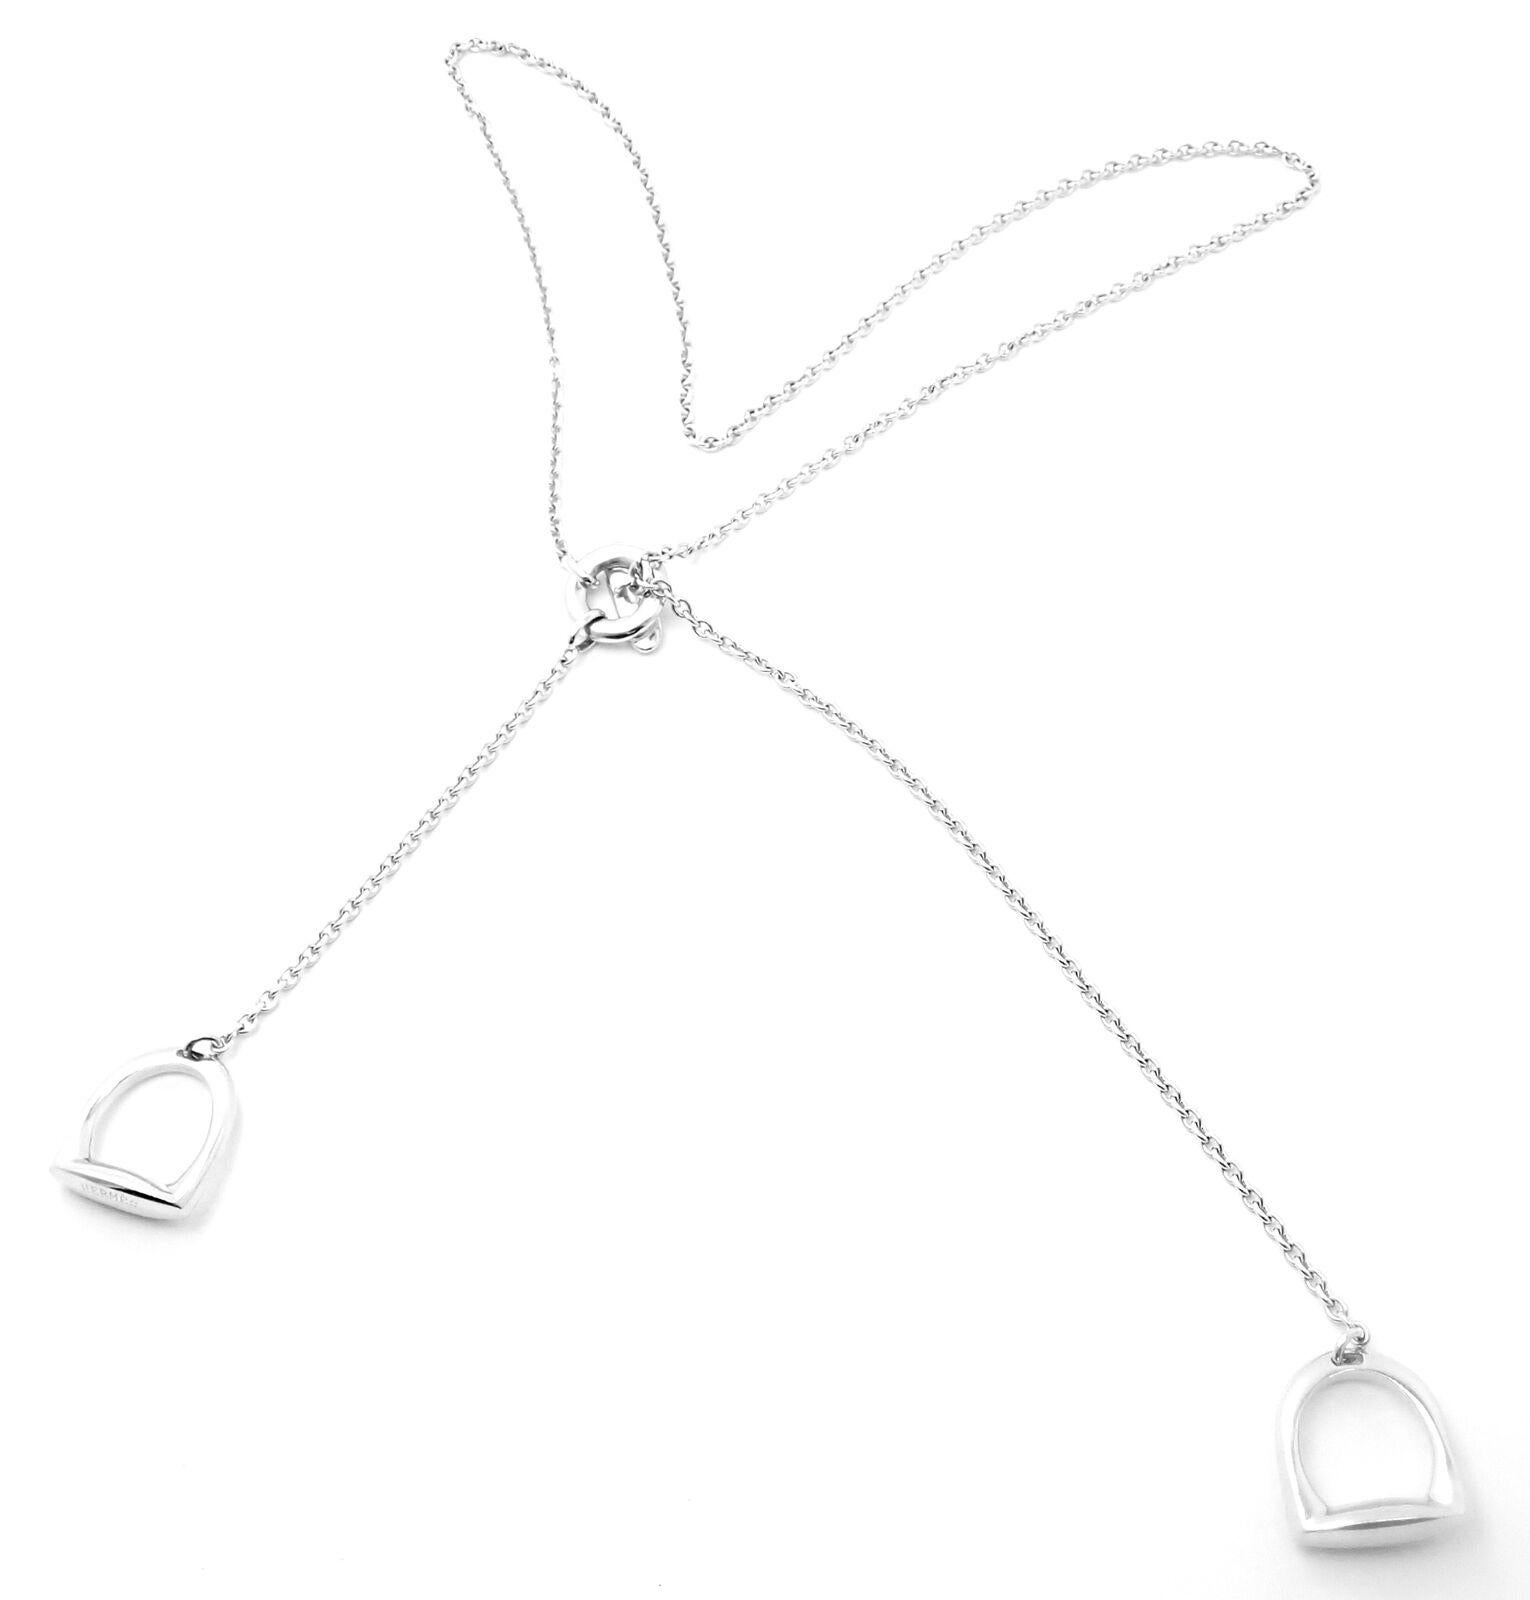 Hermes Stirrup Lariat White Gold Link Chain Necklace 1